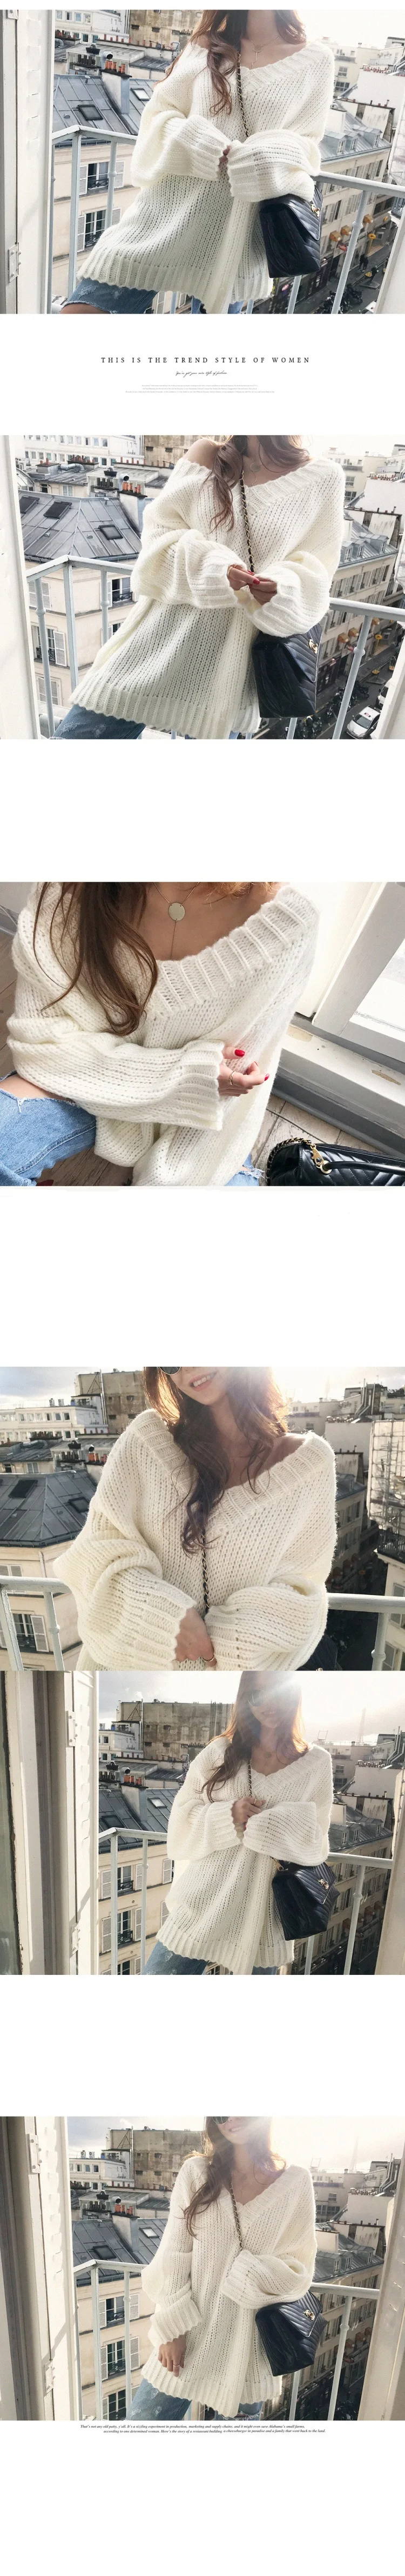 3 Colors Ivory & Green & Blue Mohair Knitting Jumper Autumn Korean Hollow Out V-neck Pullover Sweater For Women C9N518B